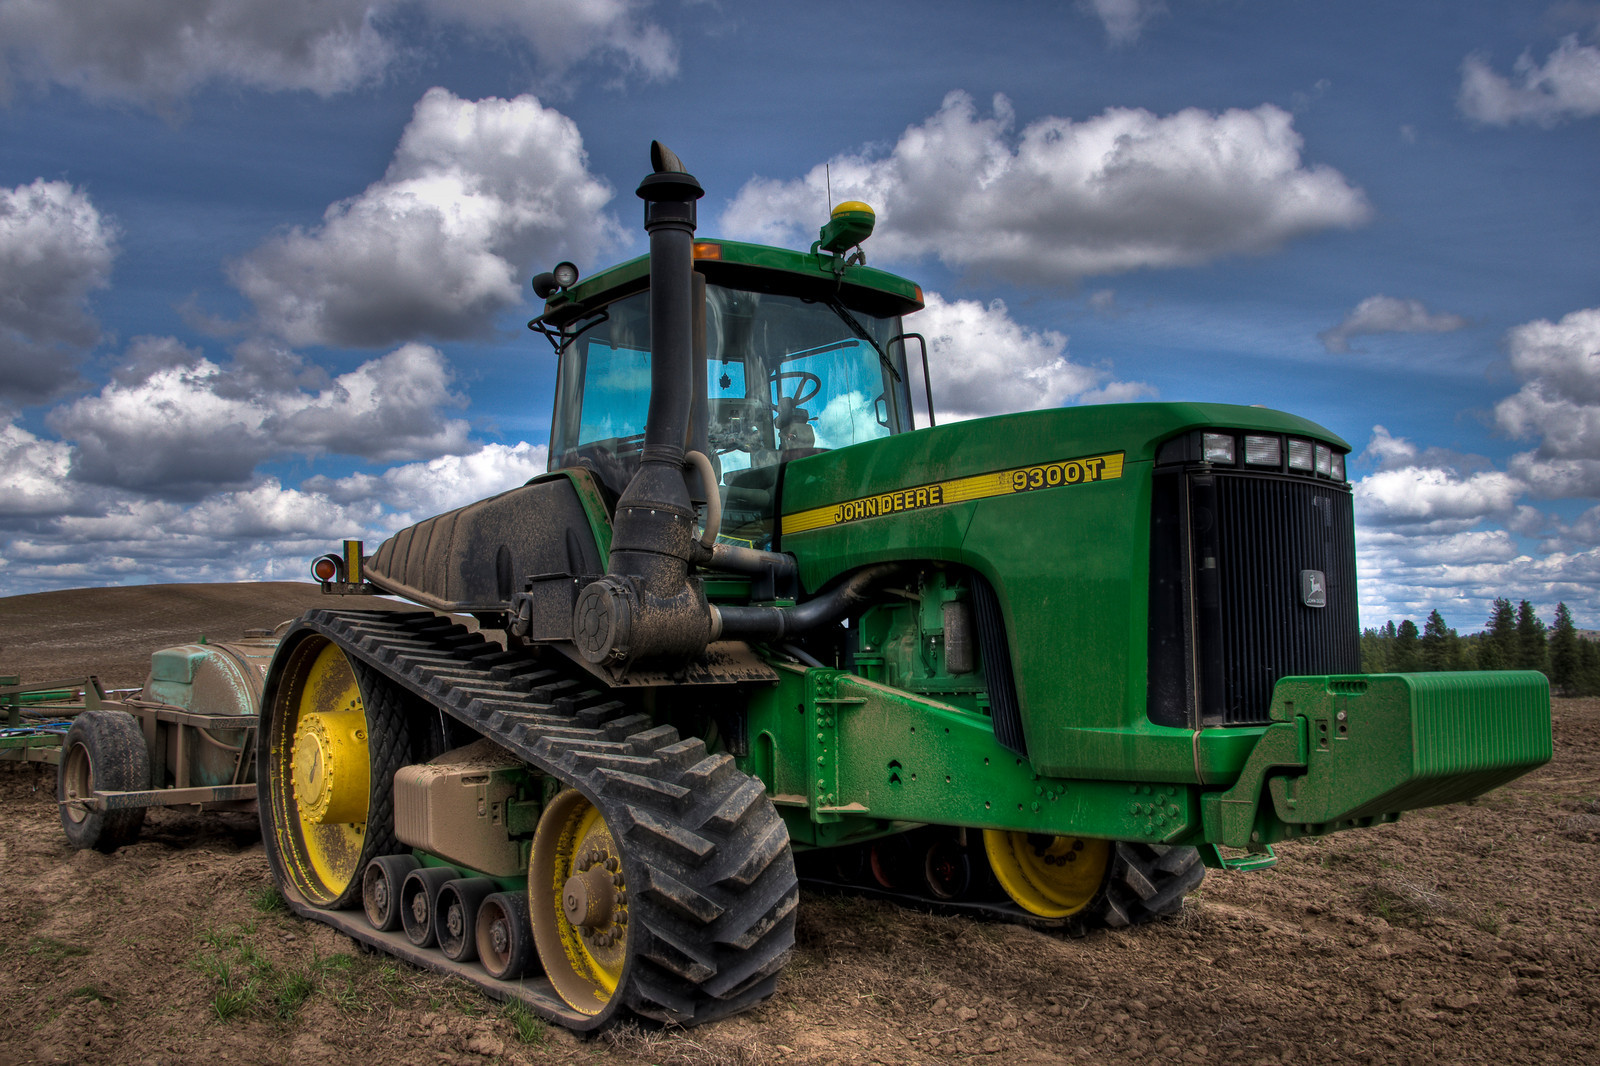 john deere iphone wallpaper,land vehicle,vehicle,tractor,agricultural machinery,transport